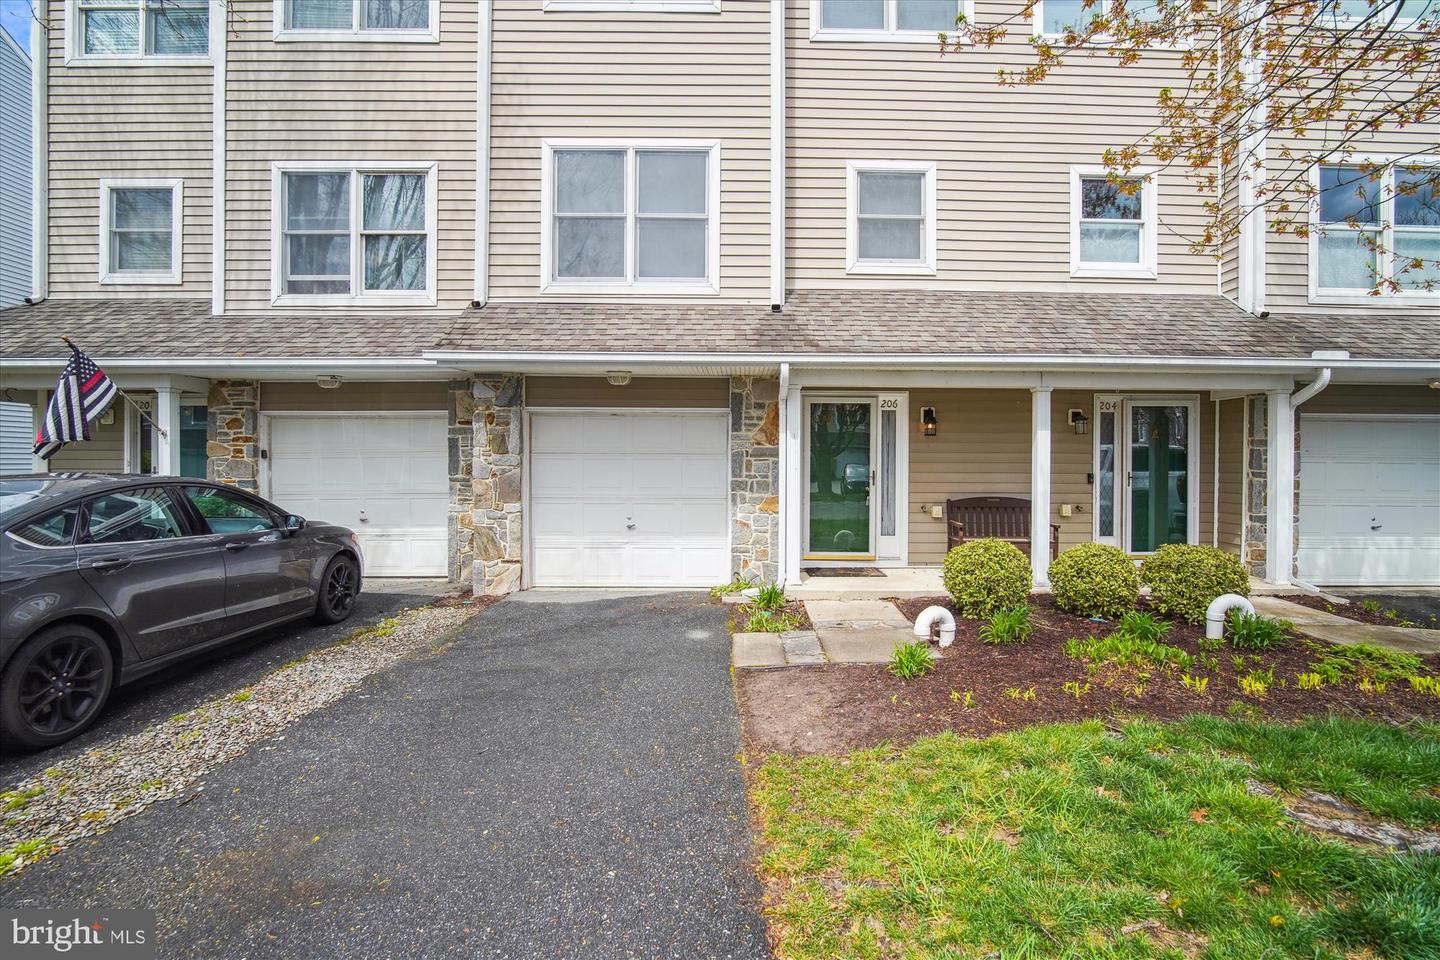 View Chester, MD 21619 townhome